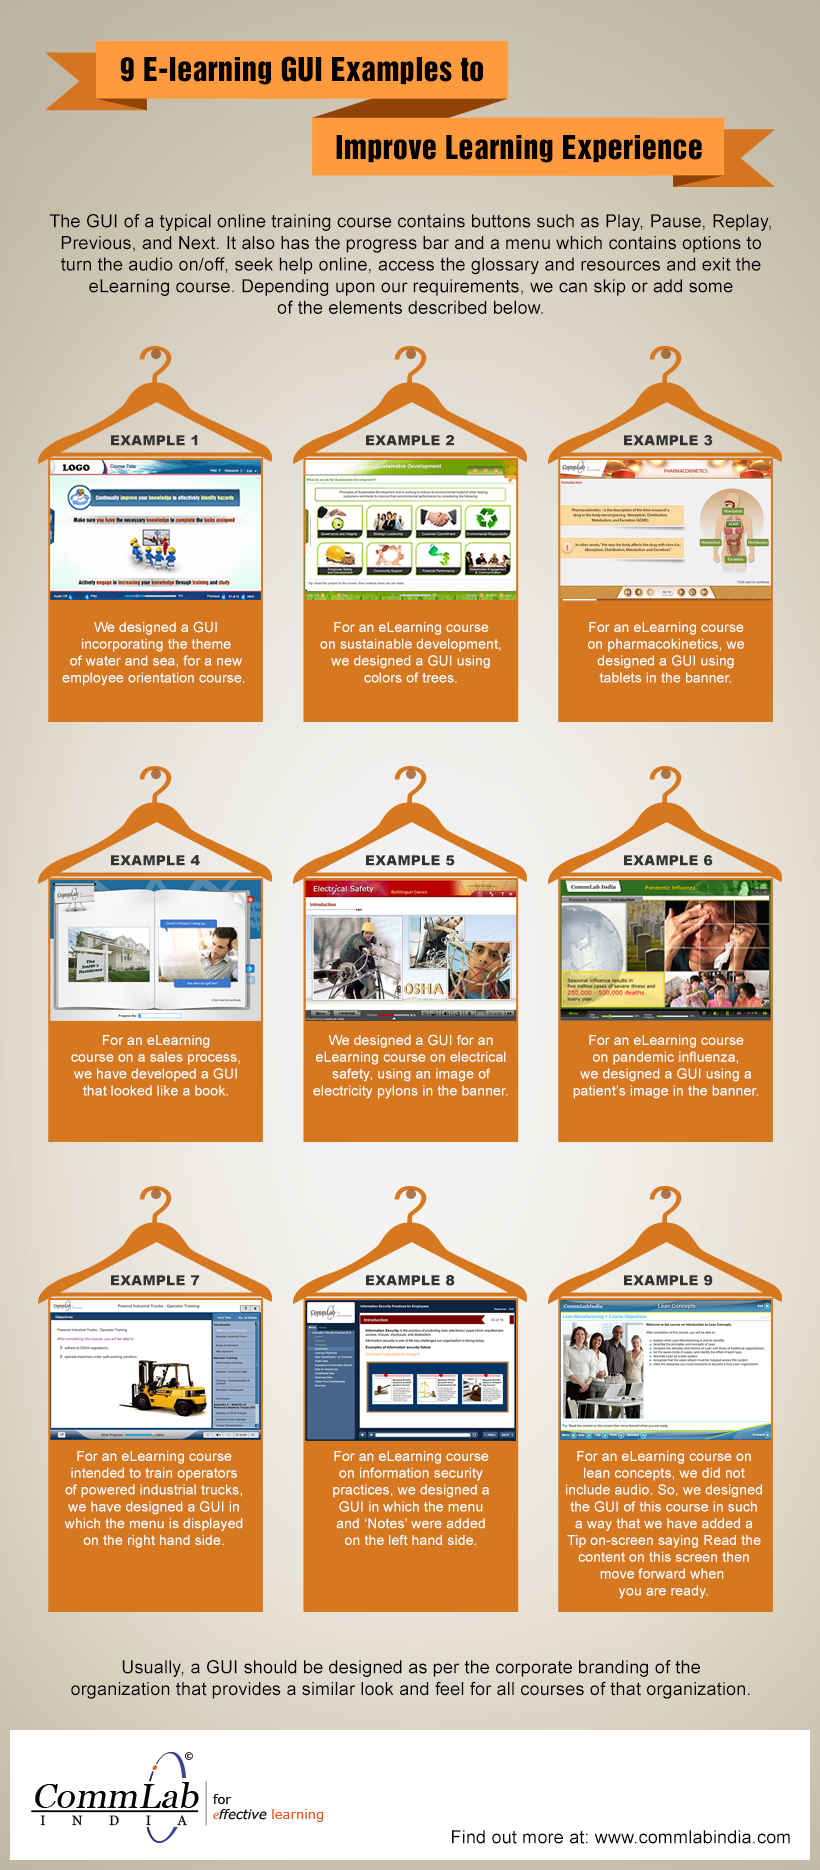 9 E-learning GUI Examples to Improve Learning Experience - An Infographic